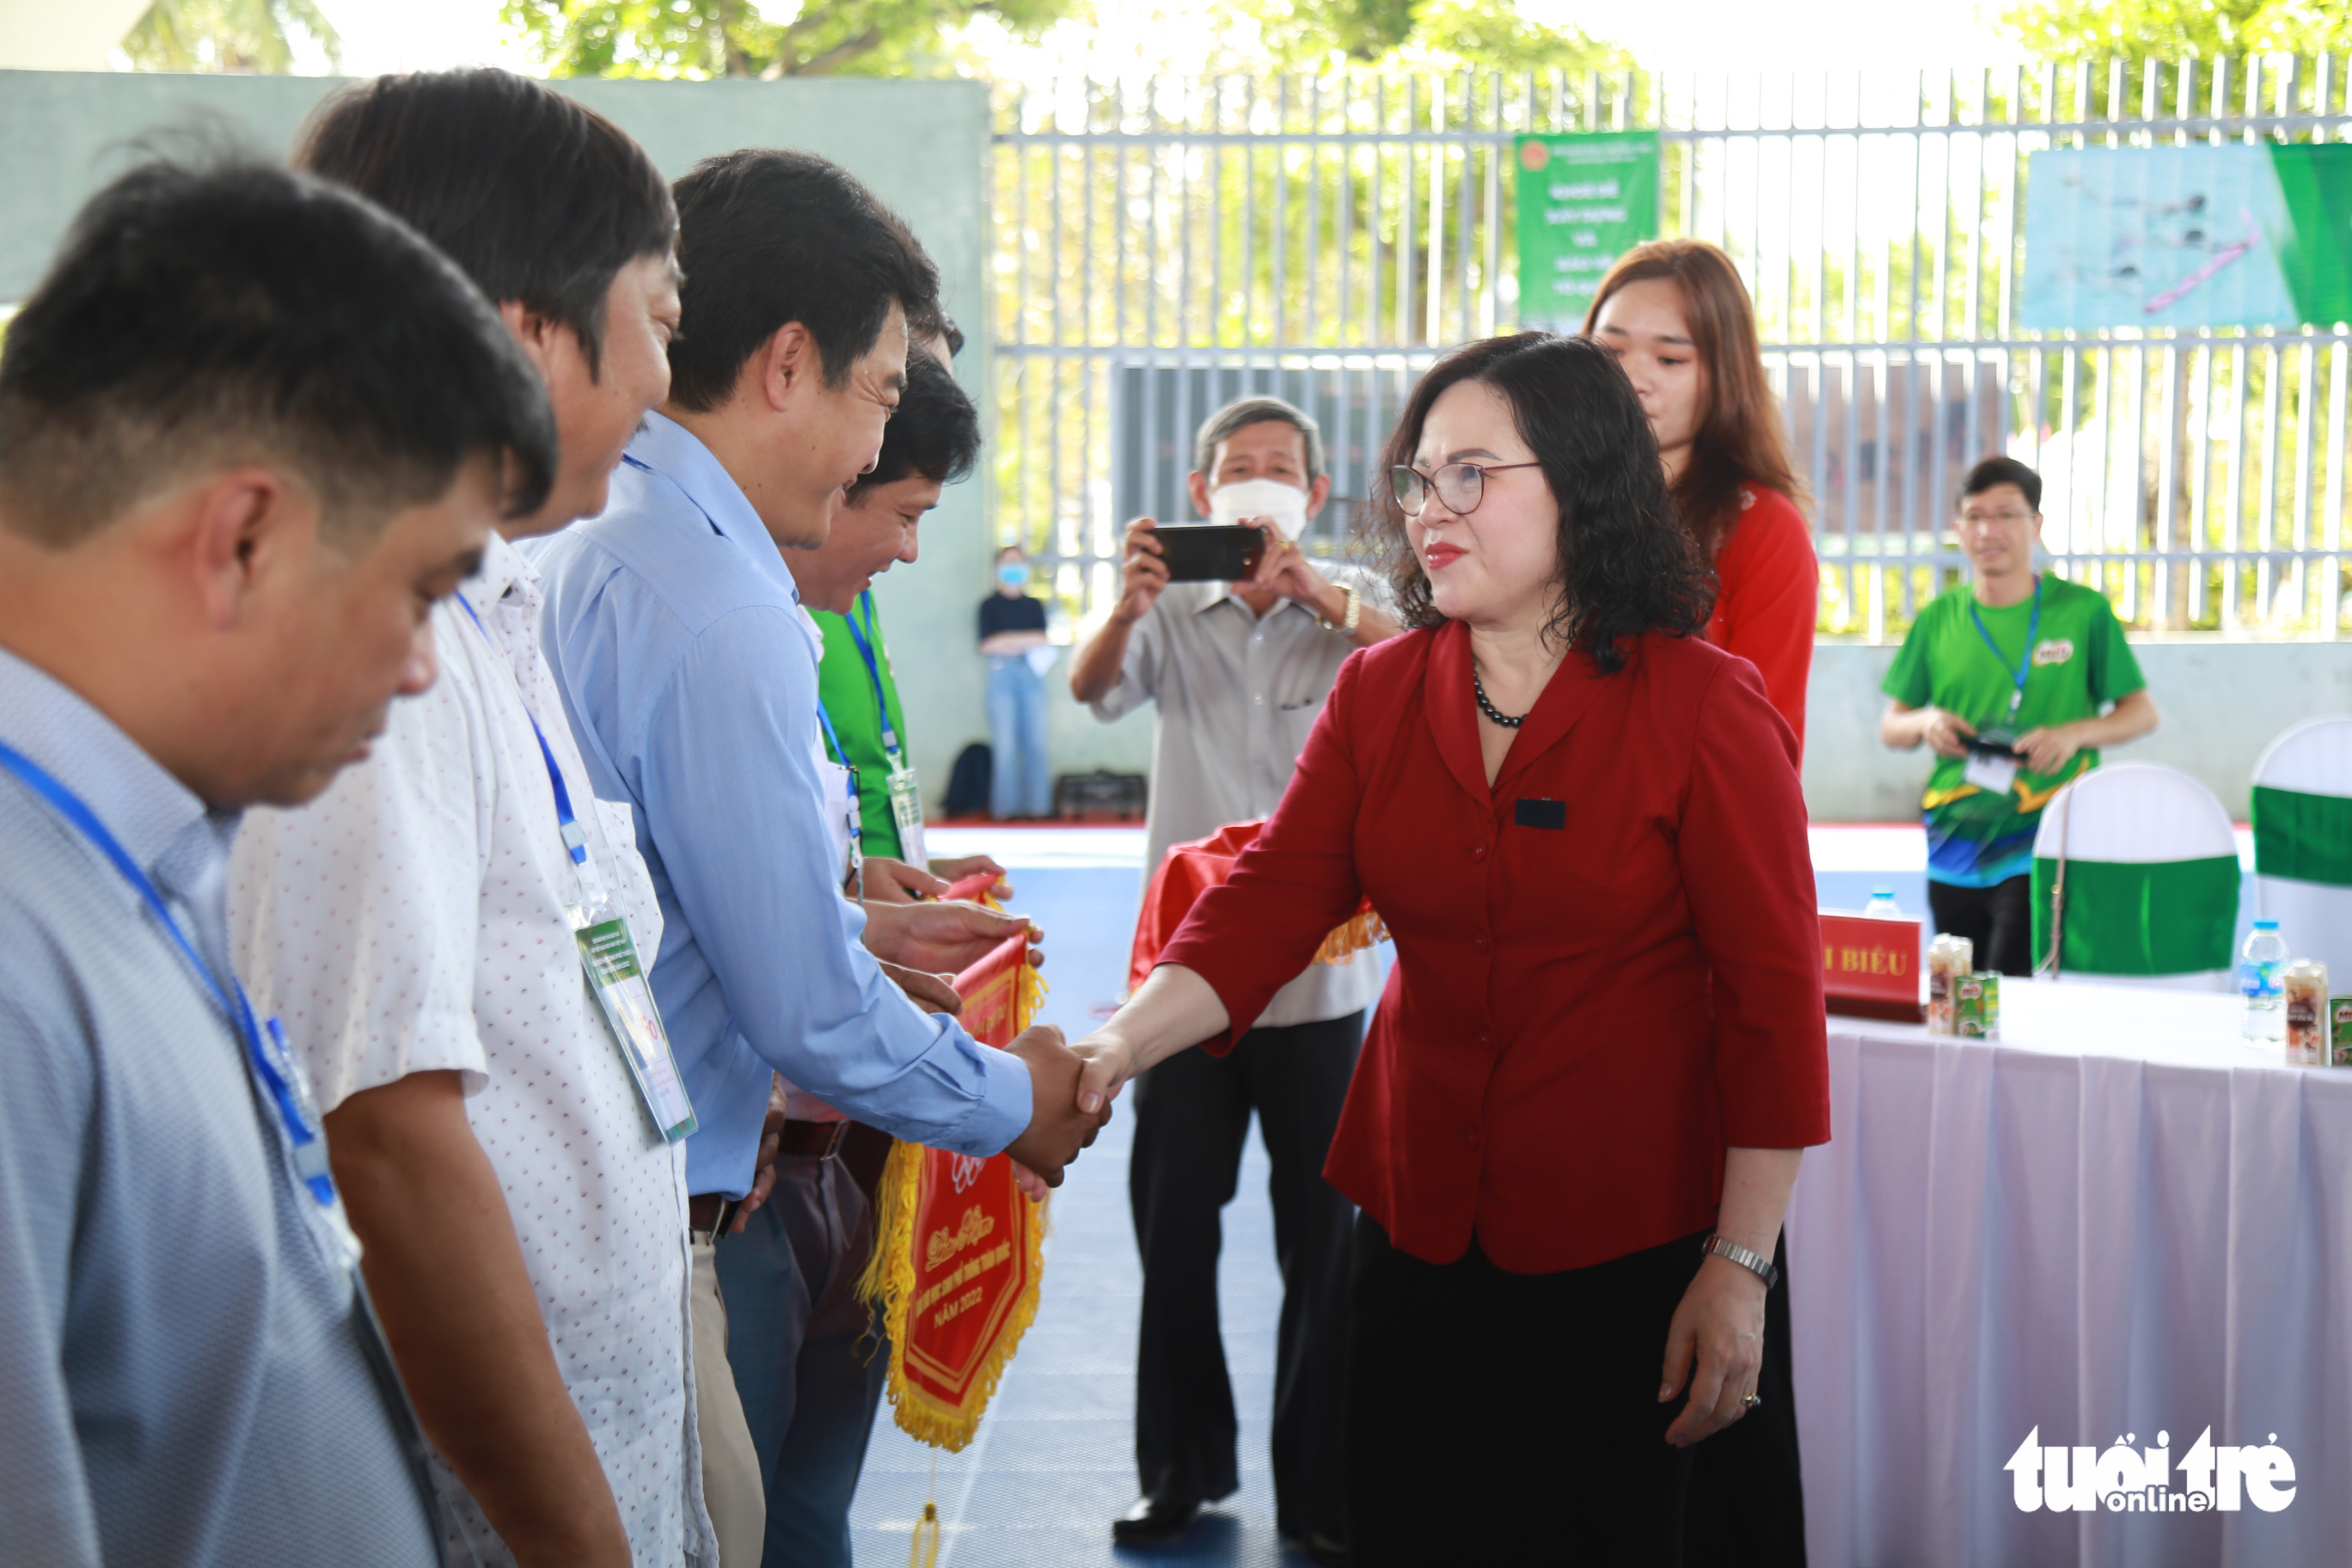 Deputy Minister of Education and Training Ngo Thi Minh (R) during the launching ceremony of the campaign to prevent drowning in children in Da Nang City, Vietnam, June 10, 2022. Photo: Doan Nhan / Tuoi Tre